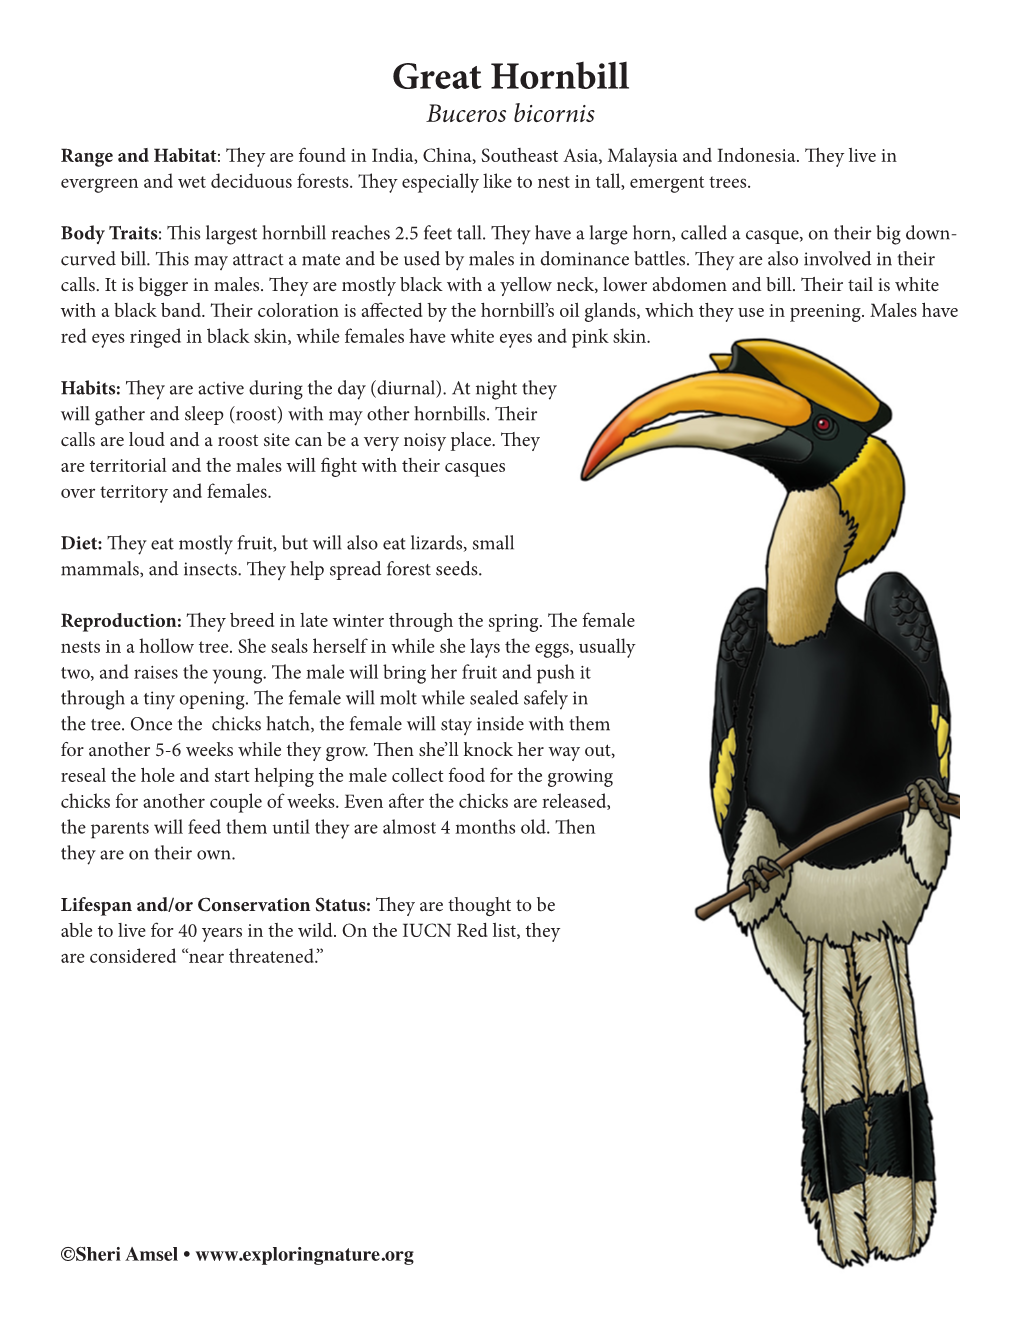 Great Hornbill Buceros Bicornis Range and Habitat: They Are Found in India, China, Southeast Asia, Malaysia and Indonesia